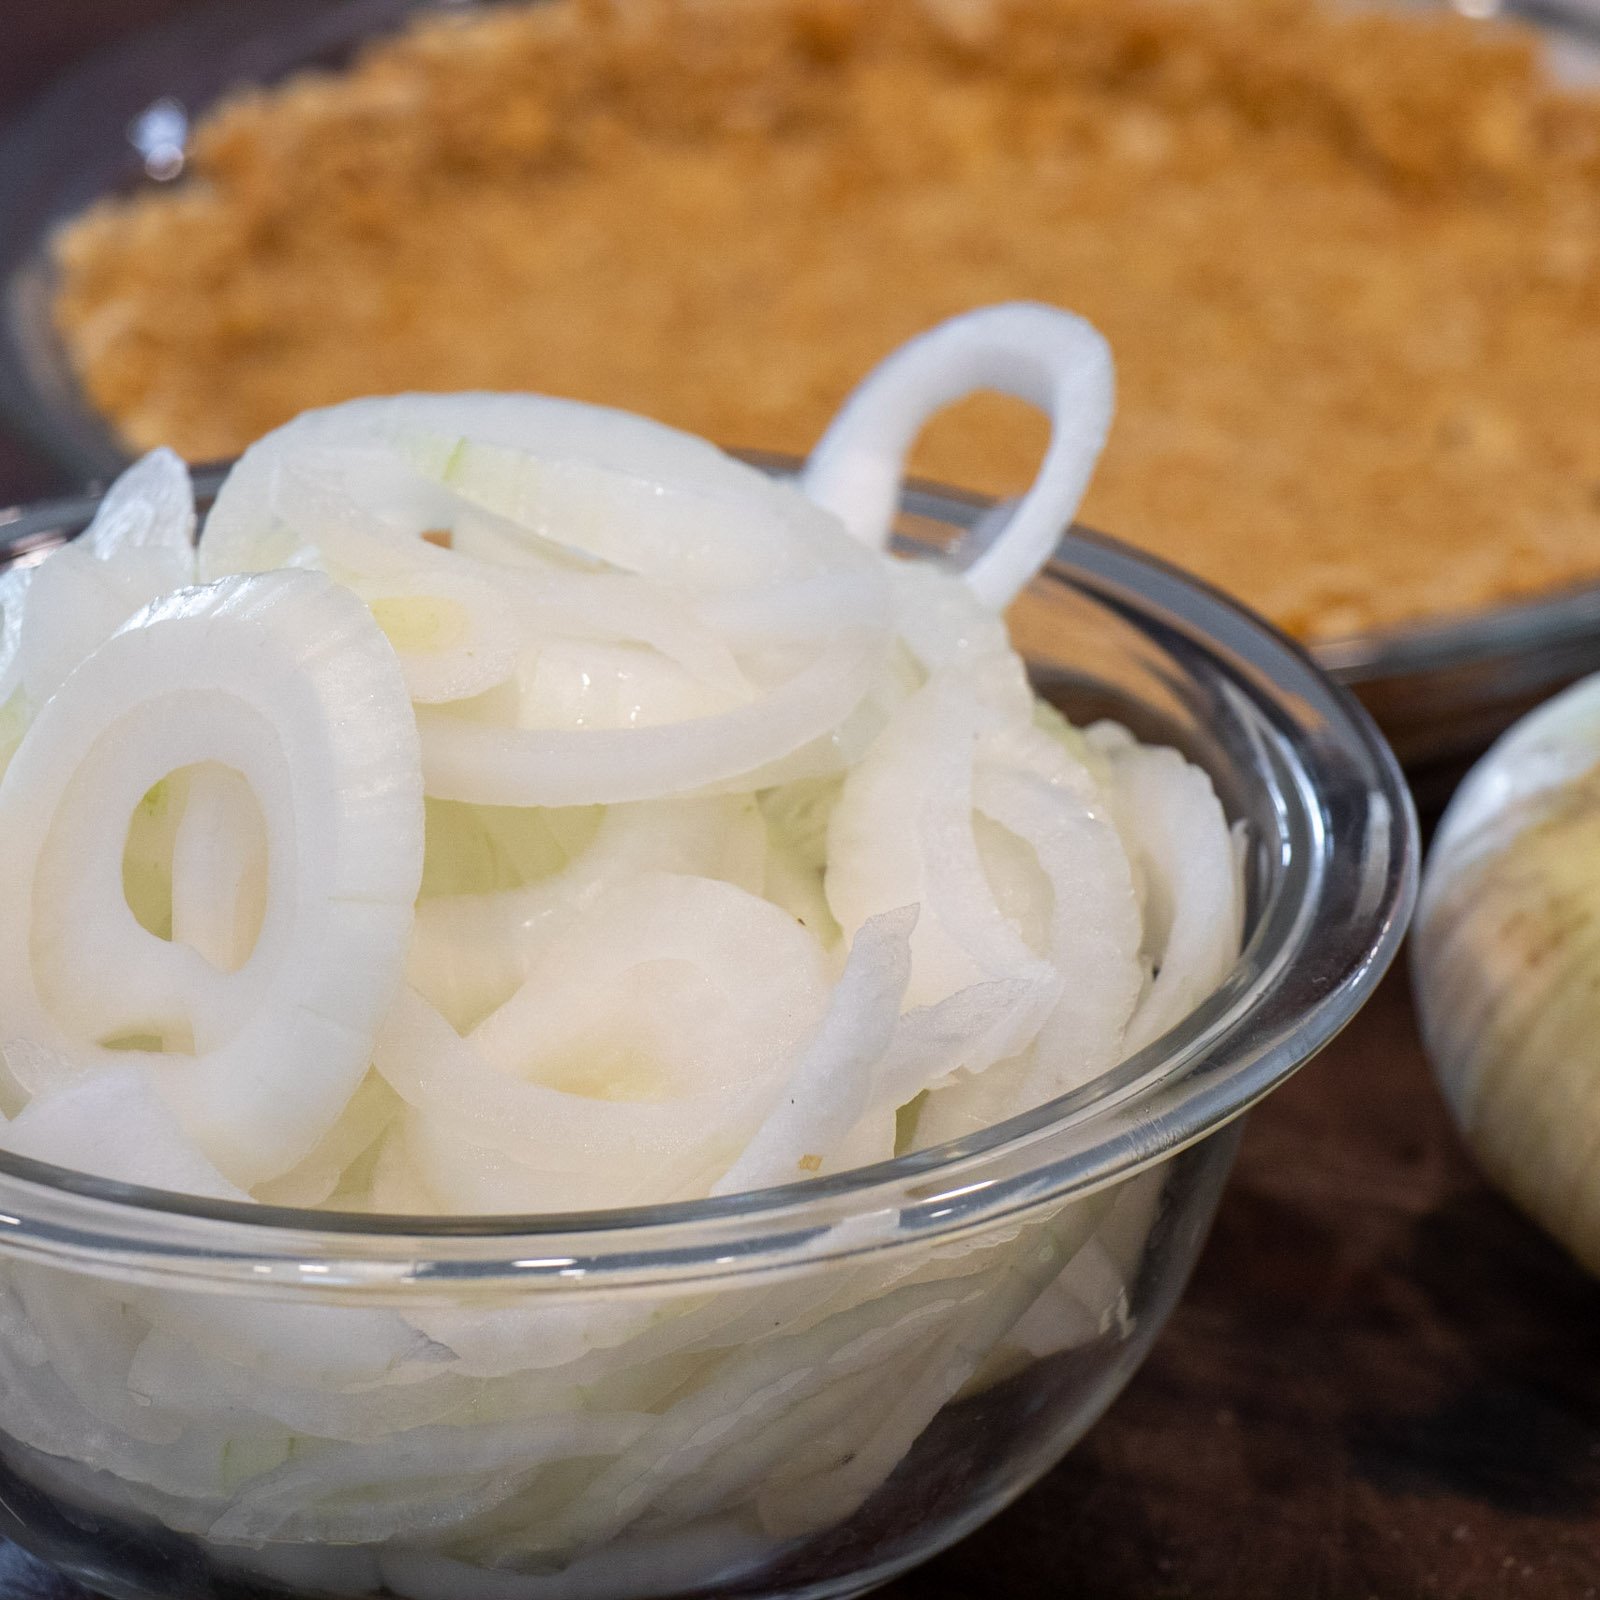 A bowl full of sliced onions.